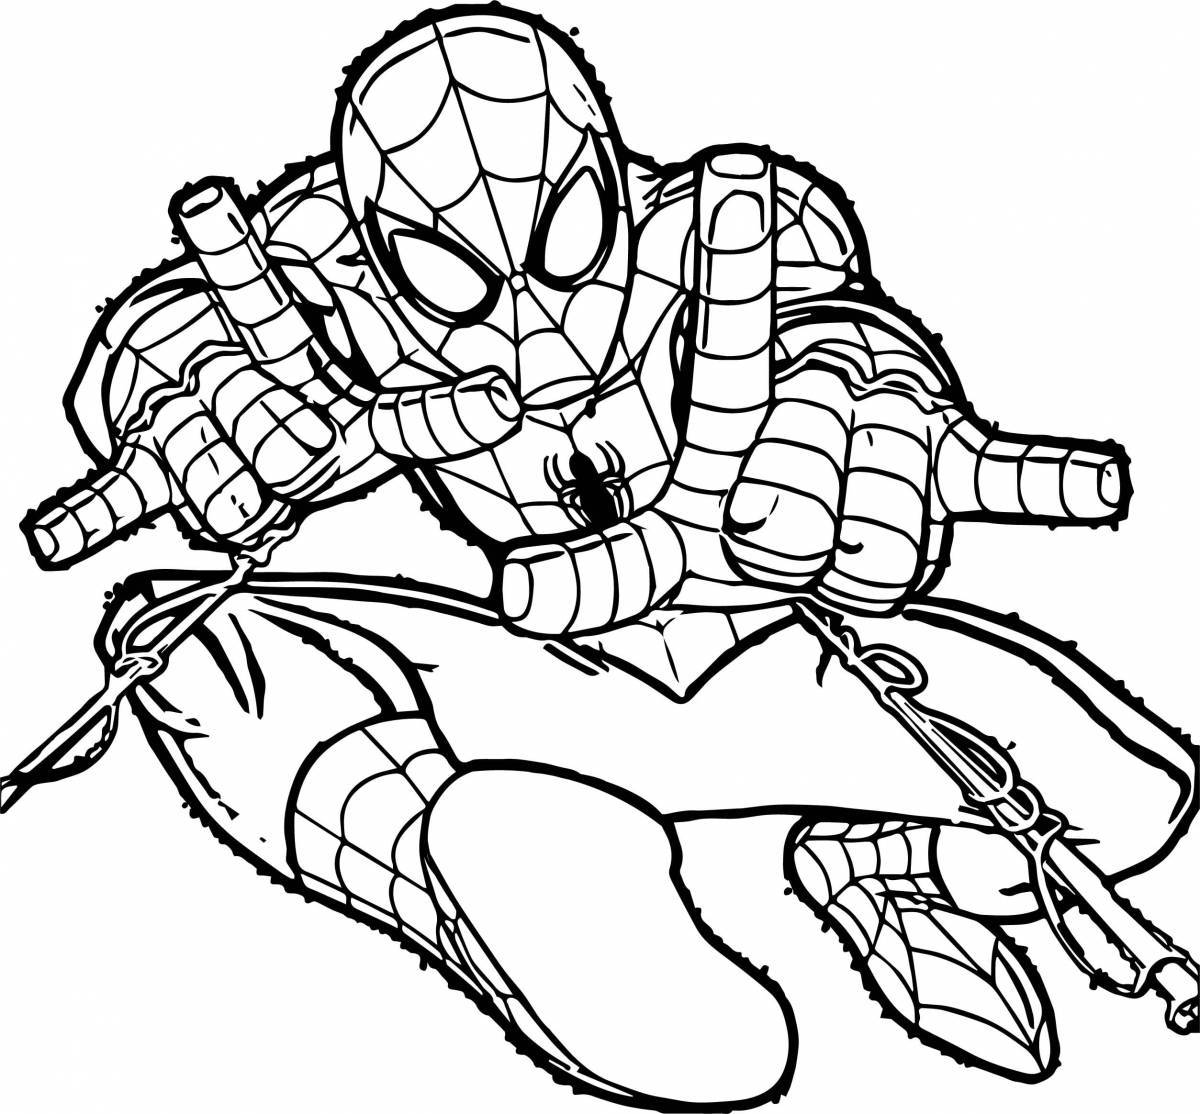 Spider-man humorous coloring book for kids